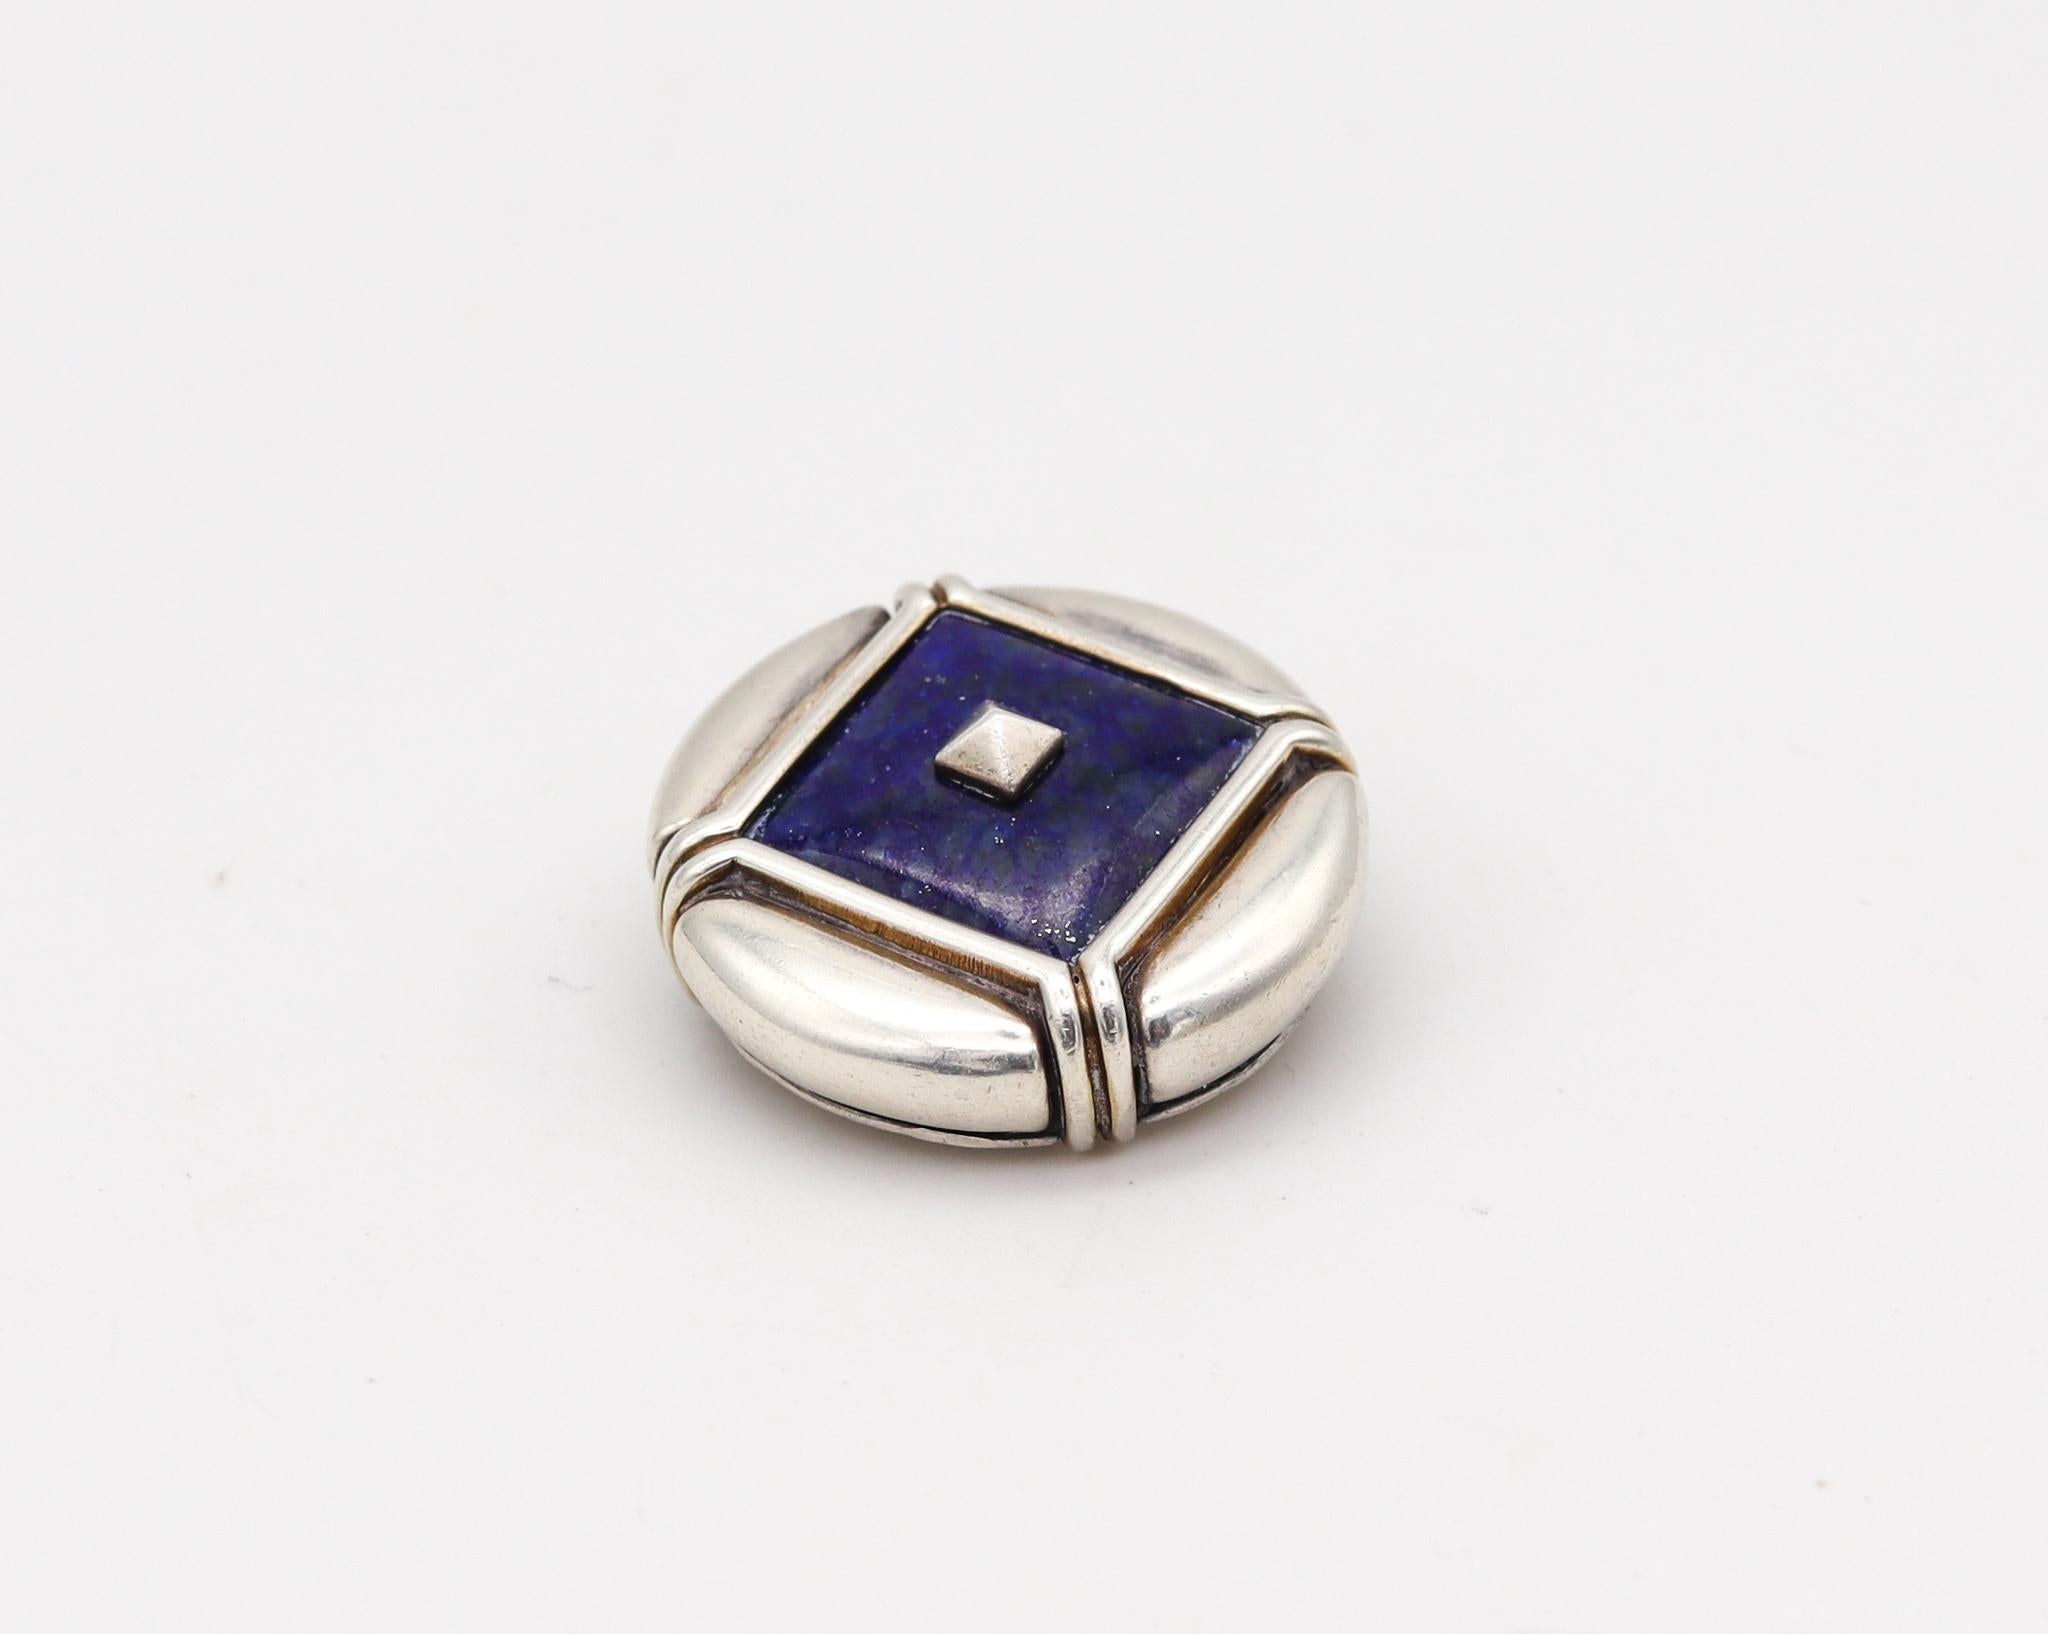 Modernist Bvlgari 1970 Roma Geometric Round Brooch in Sterling Silver with Lapis Lazuli